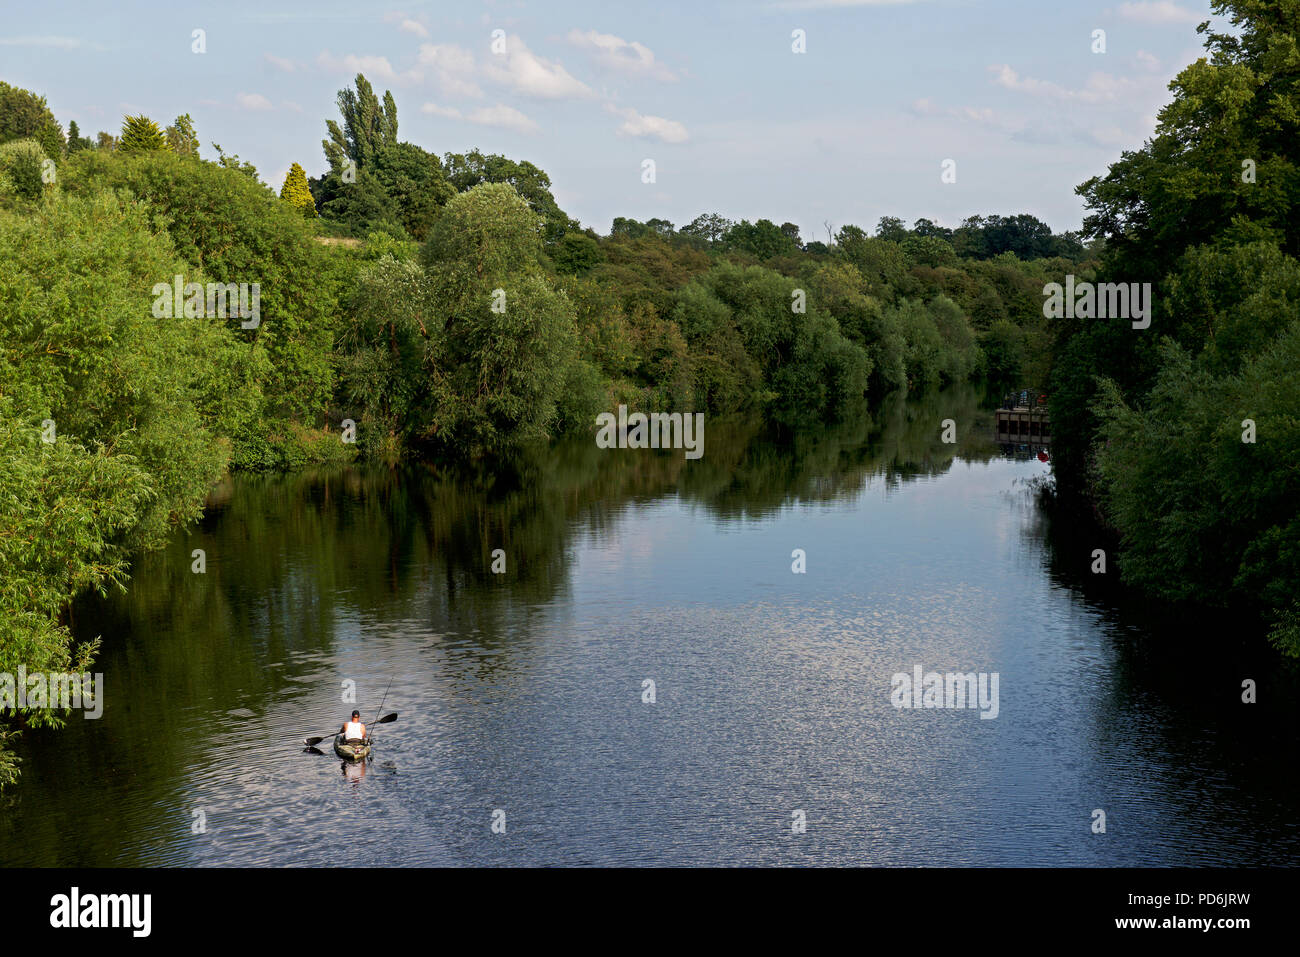 Man in inflatable kayak on River Tees, Yarm, North Yorkshire, England UK Stock Photo